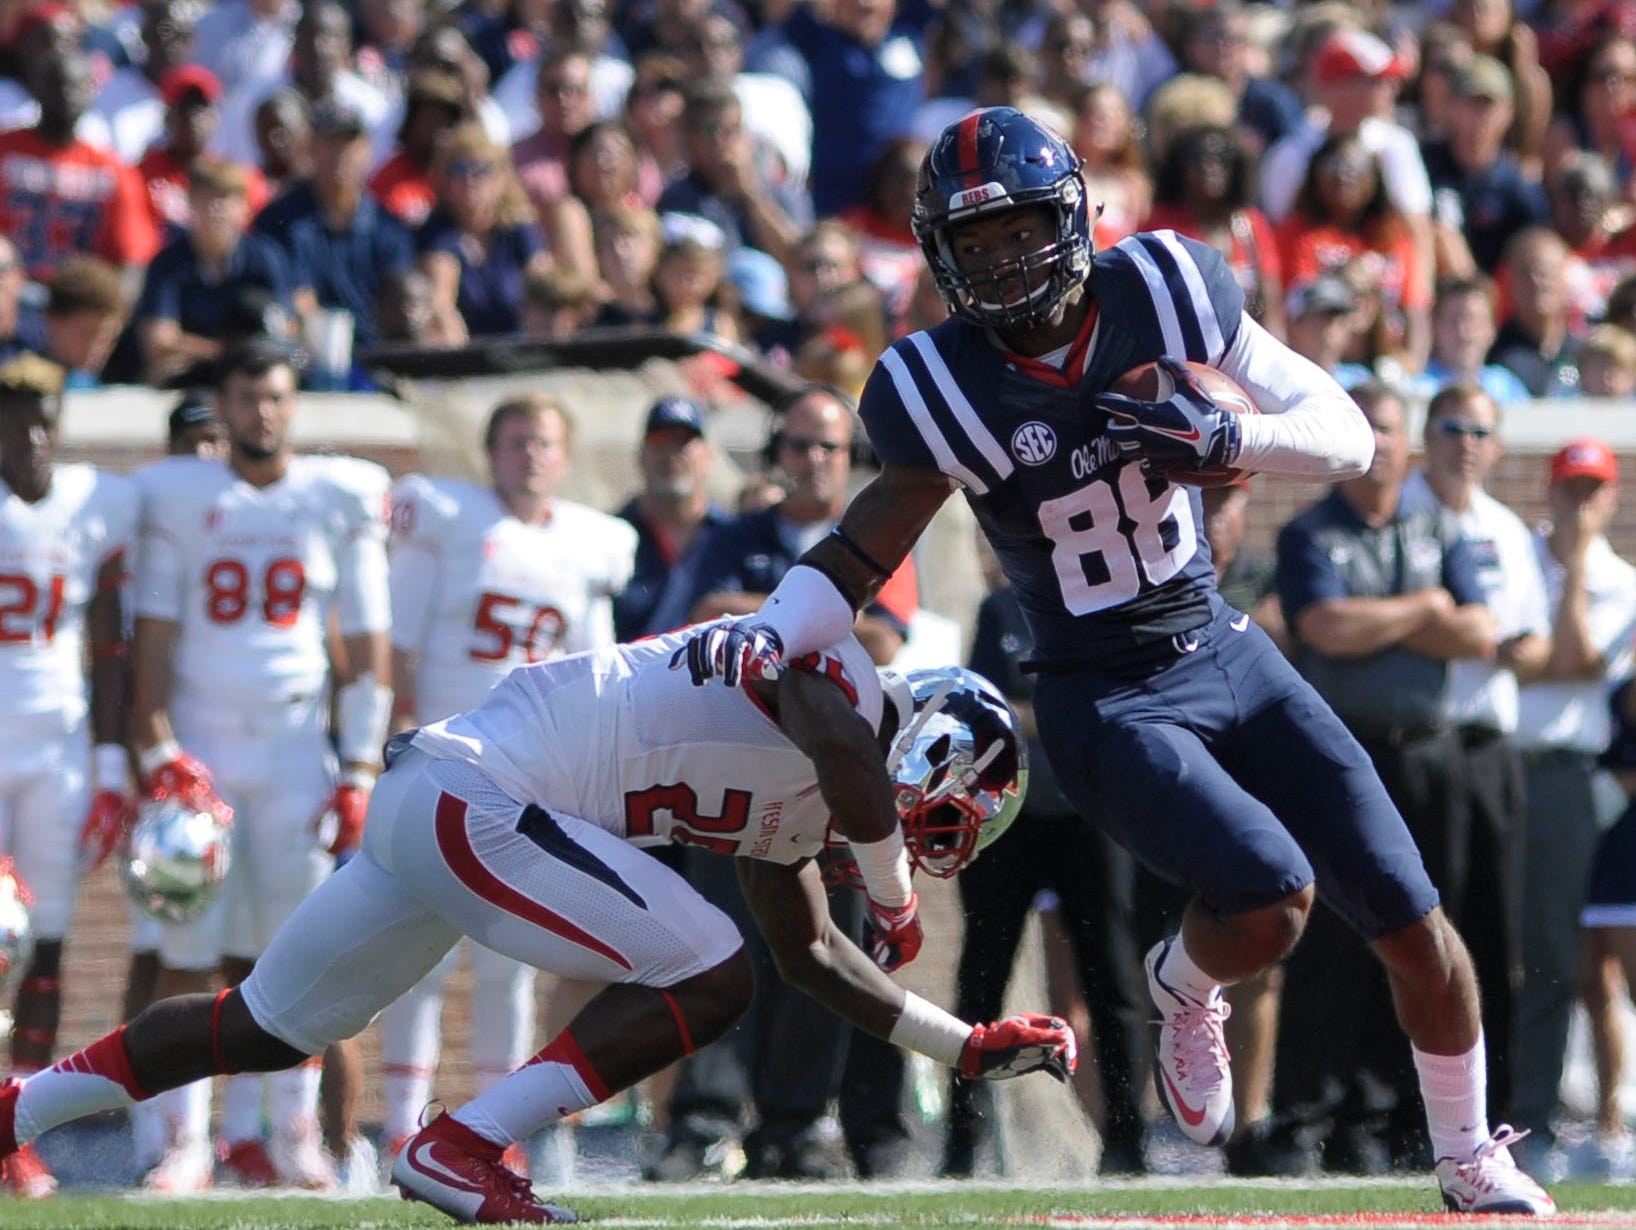 Ole Miss WR Cody Core heading to East-West Shrine game | USA TODAY Sports1636 x 1230